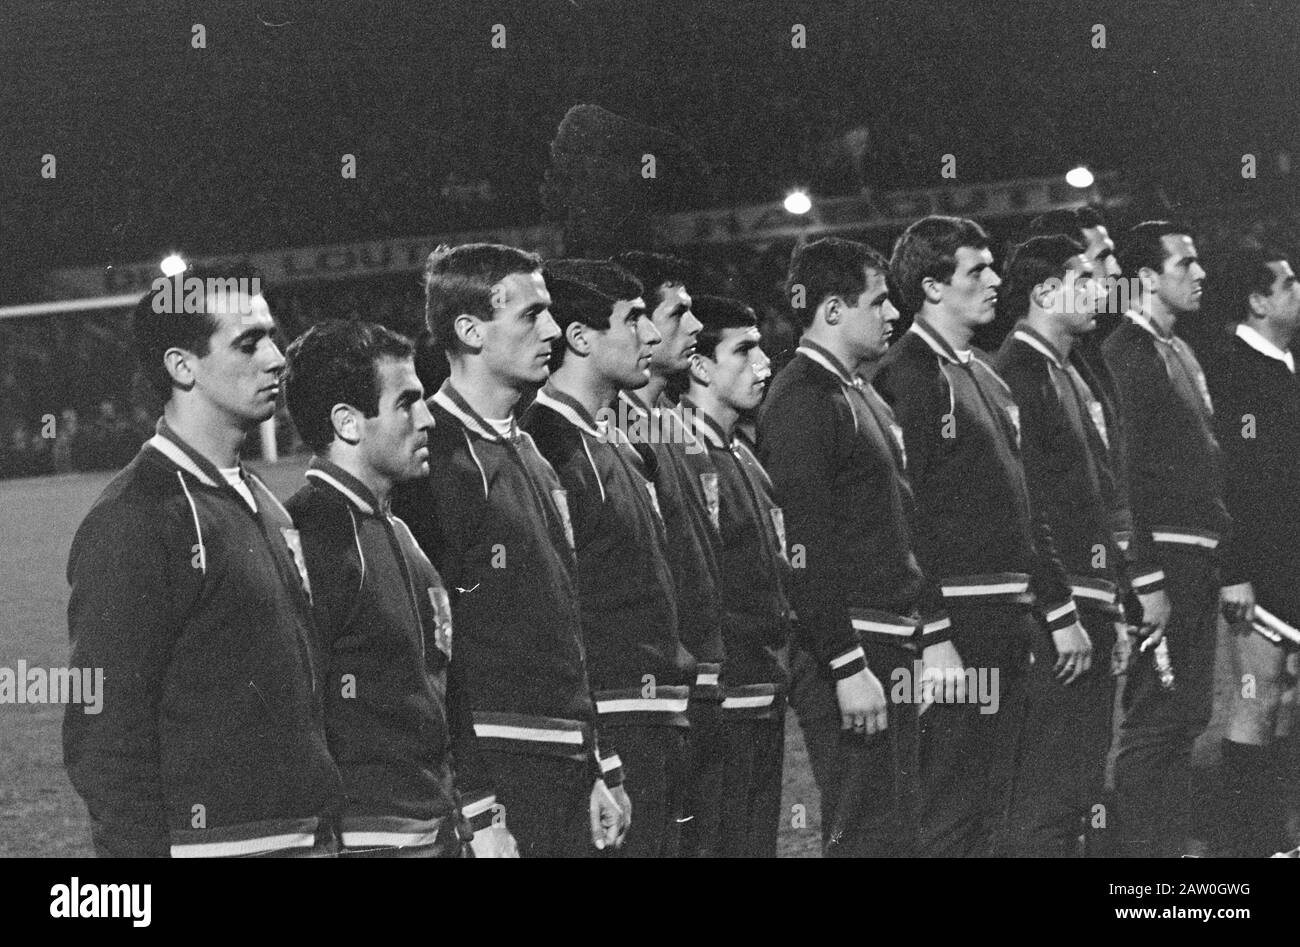 Football Interland Netherlands - Denmark  Dutch team during the playing of the national anthems Date: November 30, 1966 Location: Rotterdam, South Holland Keywords: sport, football Stock Photo